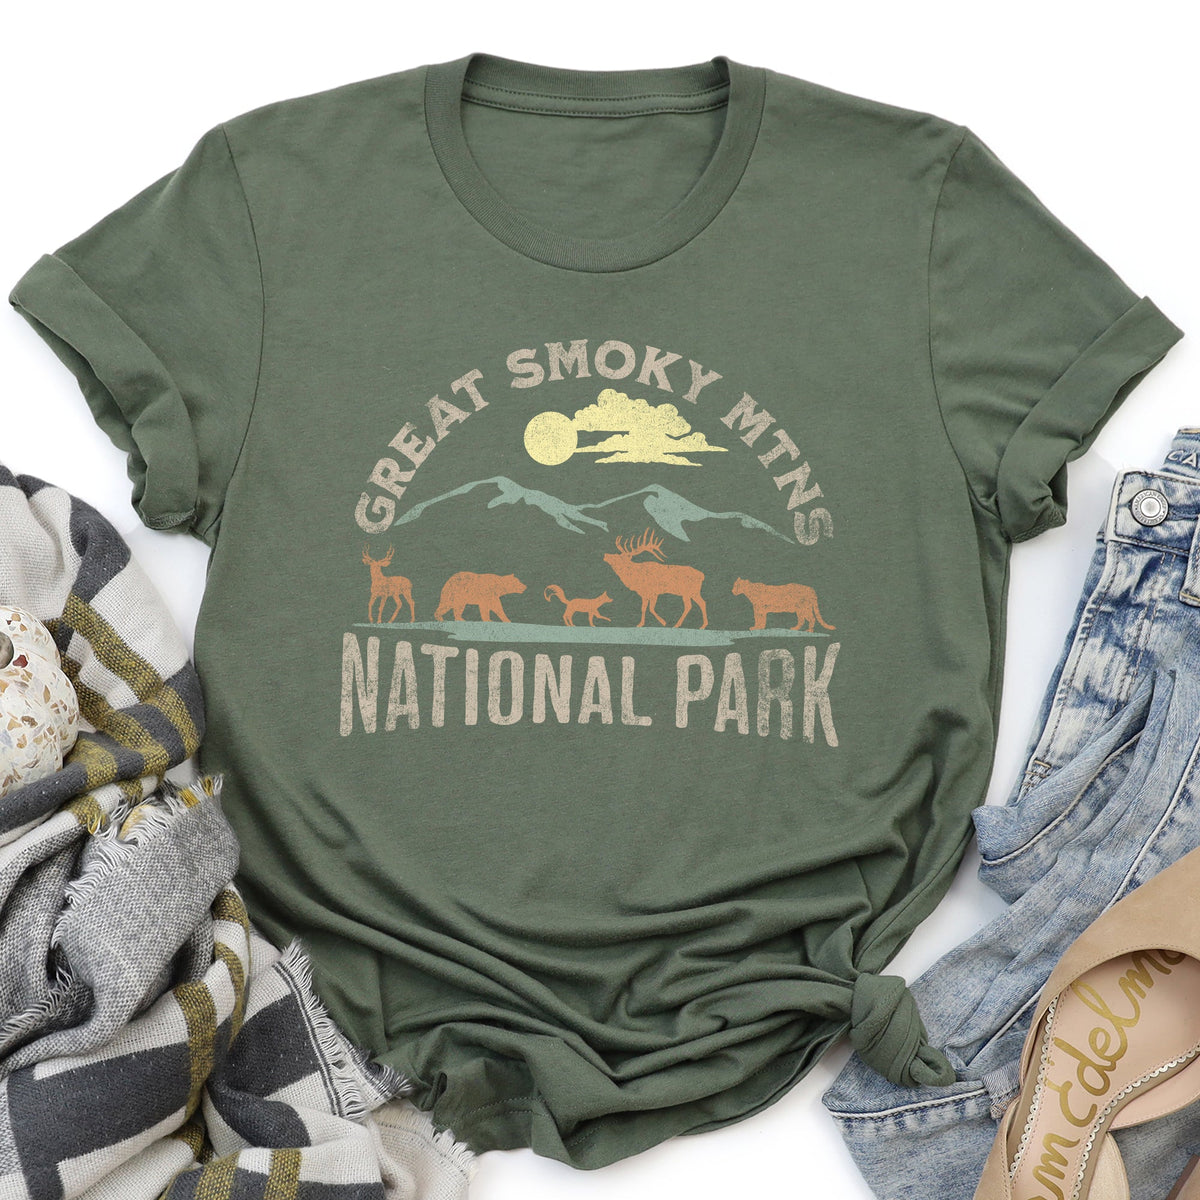 Great Smoky Mountains National Park Super Soft Tshirt